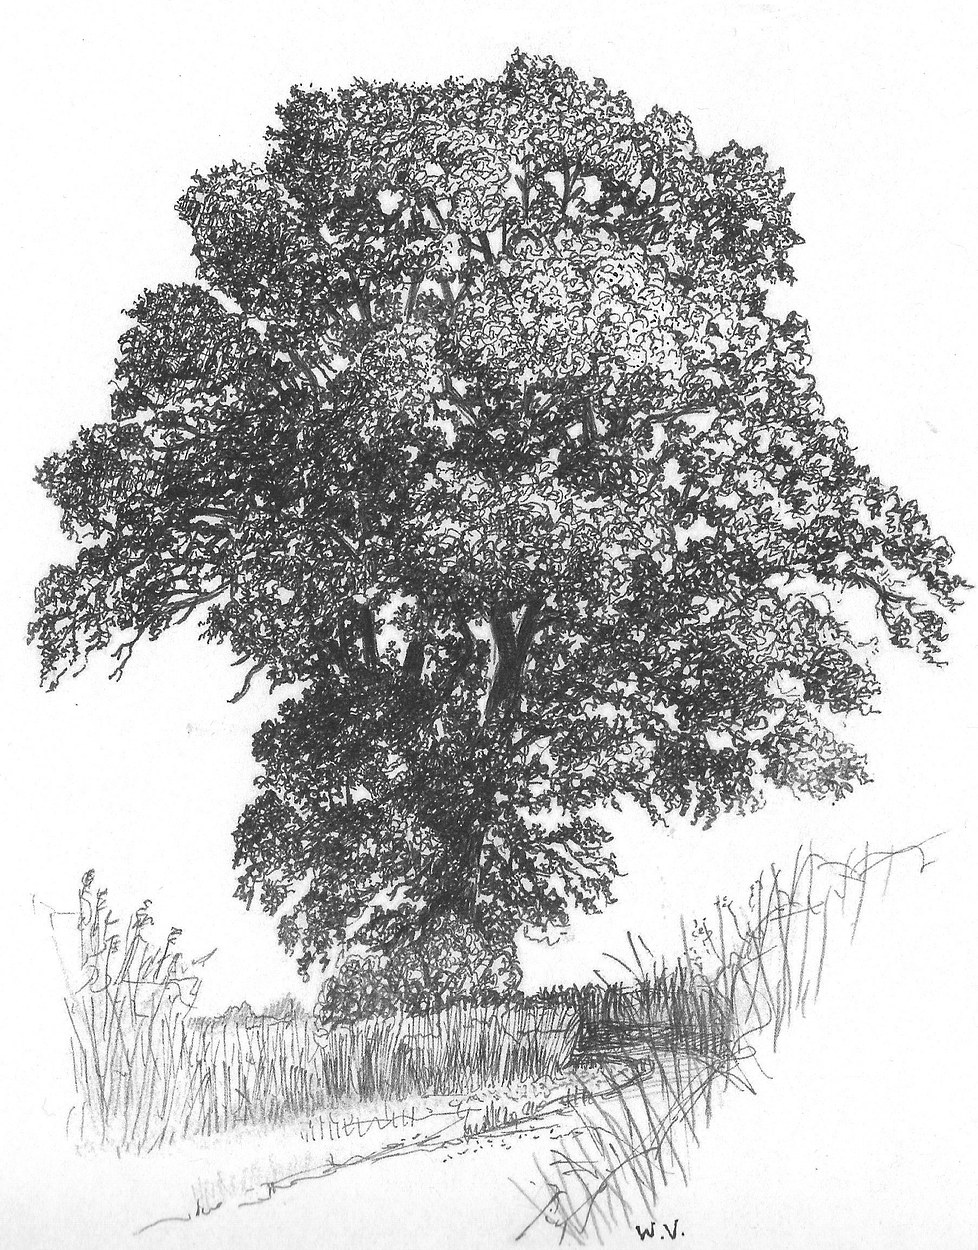 Oak by the Cary, pen drawing